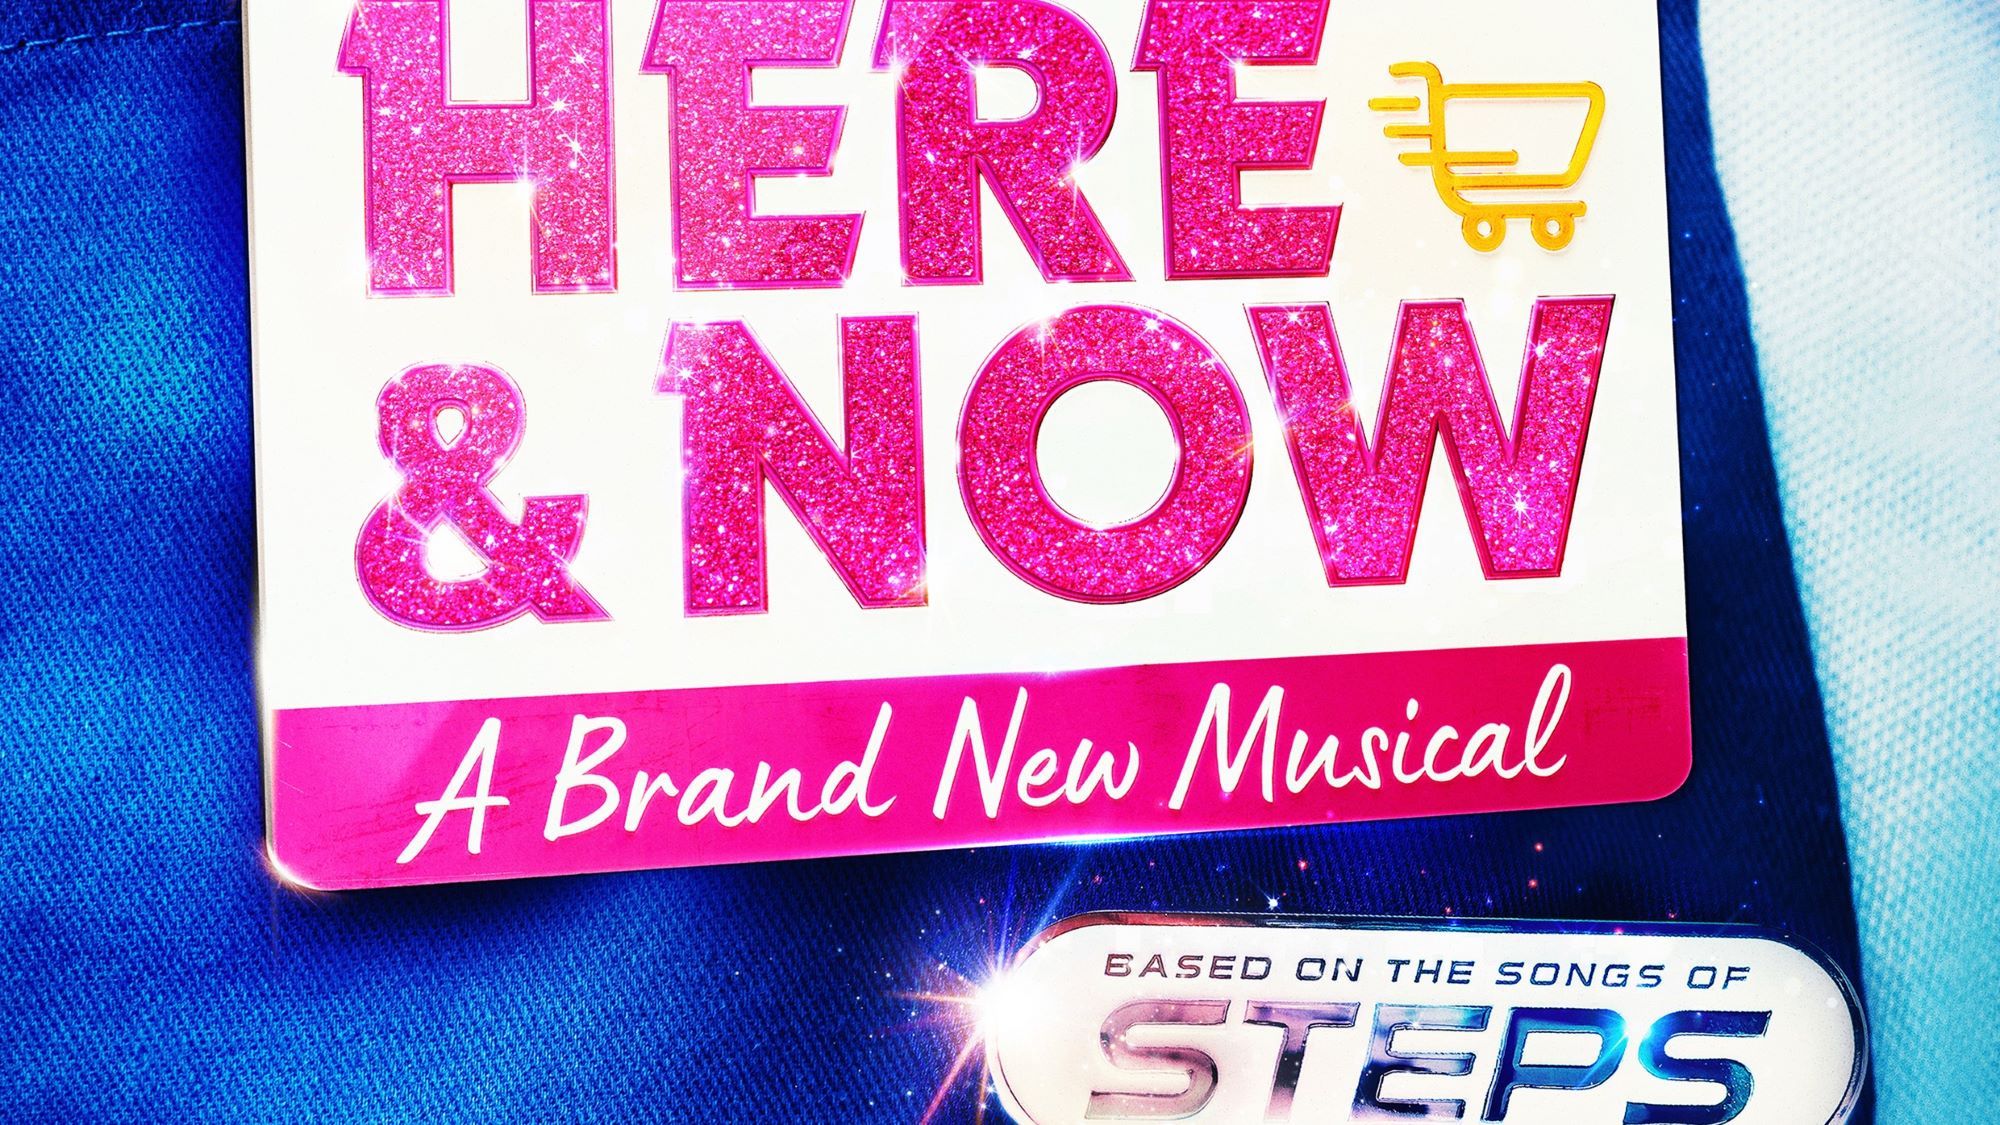 Here & Now musical poster